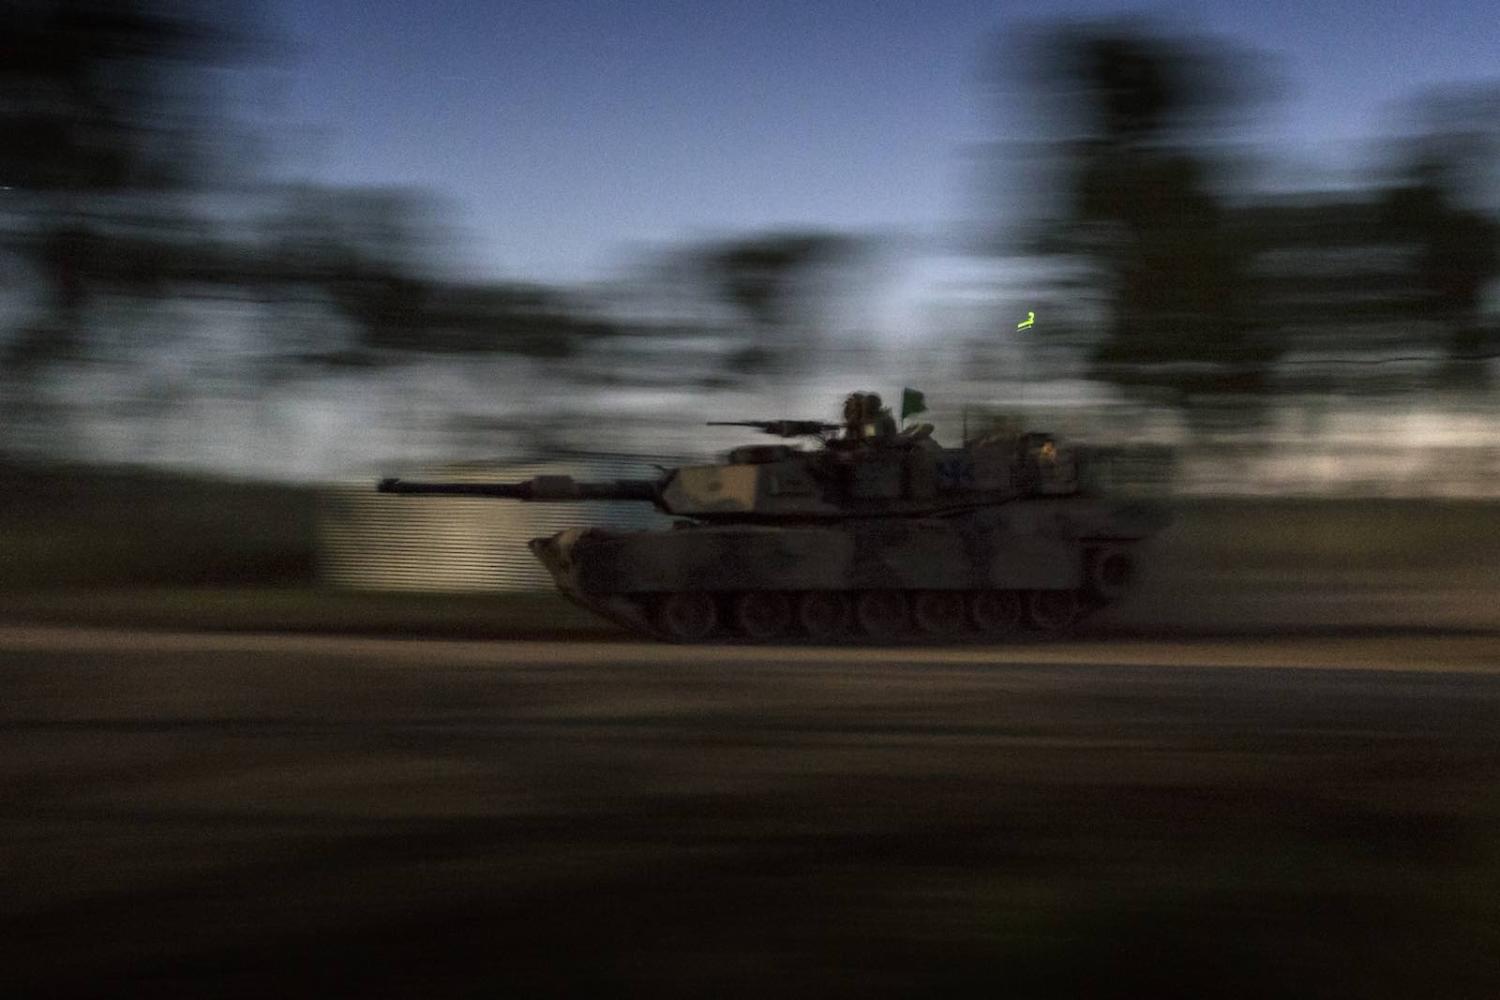 Under a fit-for-purpose assessment, an Abrams tank is clearly overkill for regional peacekeeping operations (Photo: Department of Defence)